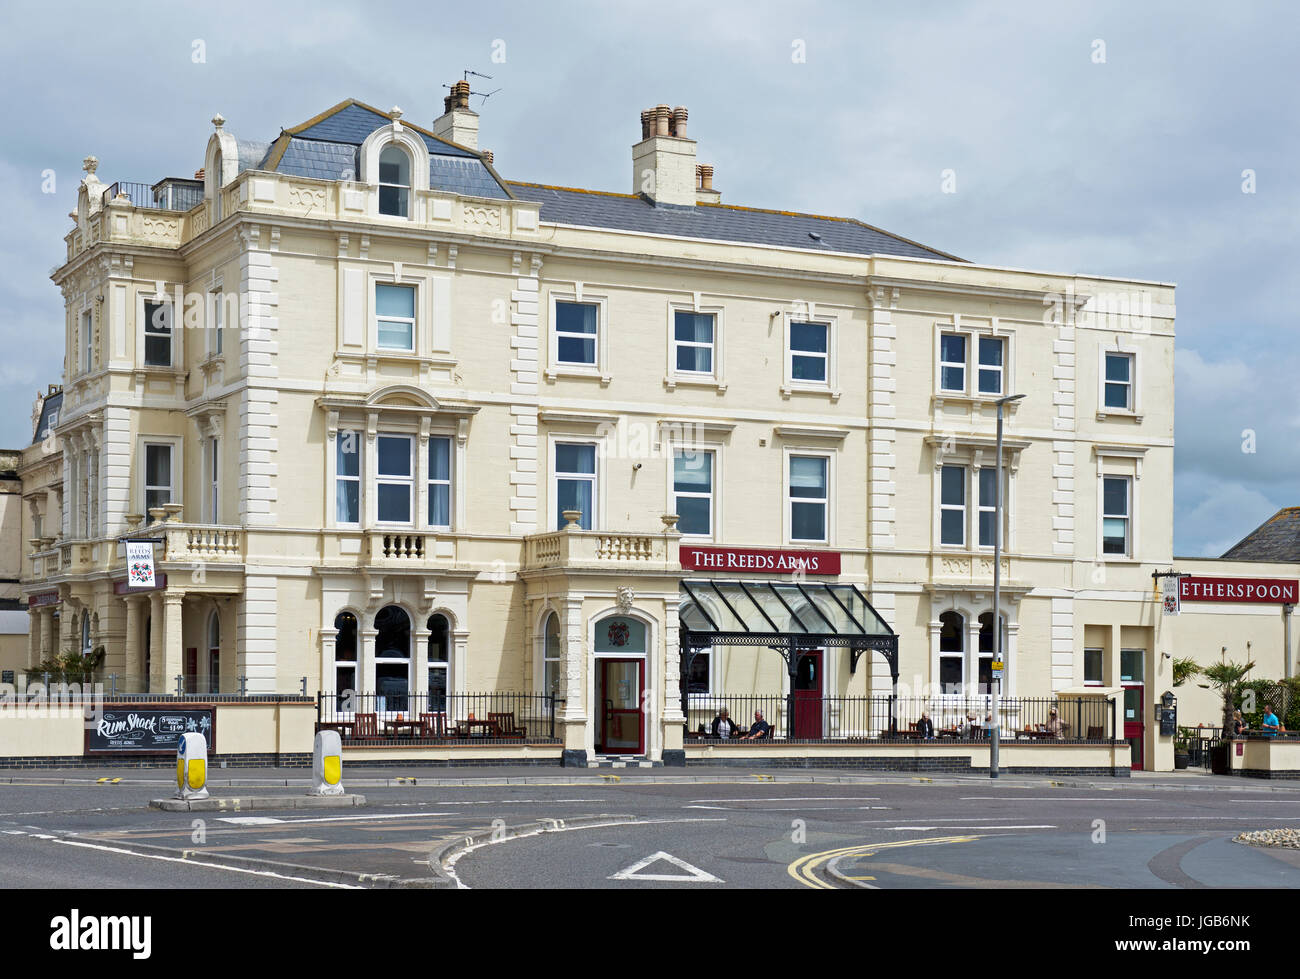 The Reed's Arms, a Wetherspoon pub, Burnham-on-Sea, Somerset, England UK Stock Photo